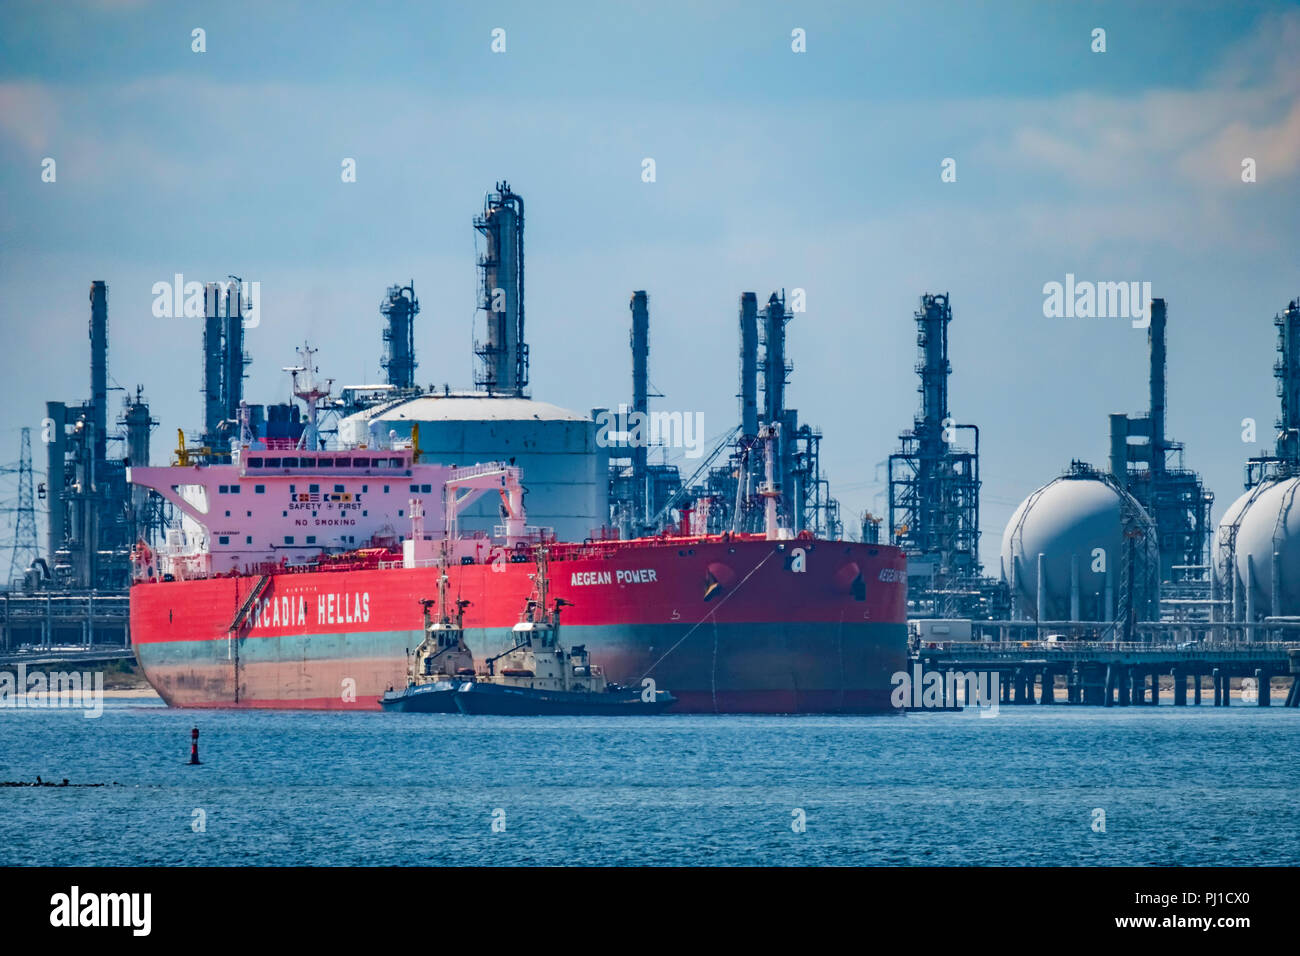 The crude oil tanker Aegean Power with a deadweight of 115,754 tons is brought into Seal Sands port by four tugs. Stock Photo